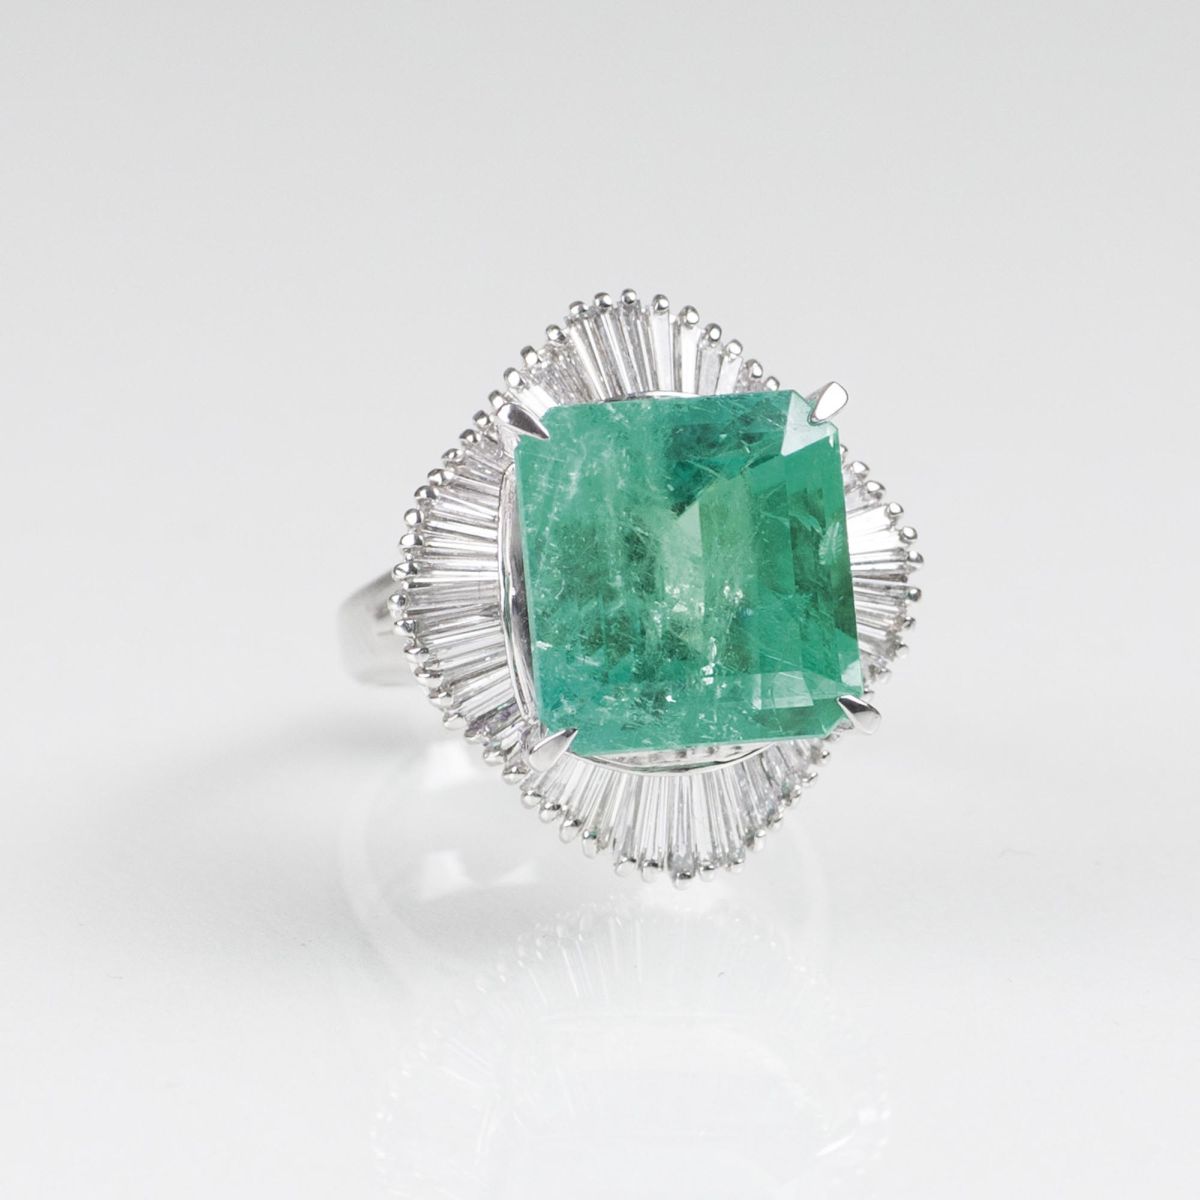 A very fine Colombian Emerald Ring with Diamonds - image 2